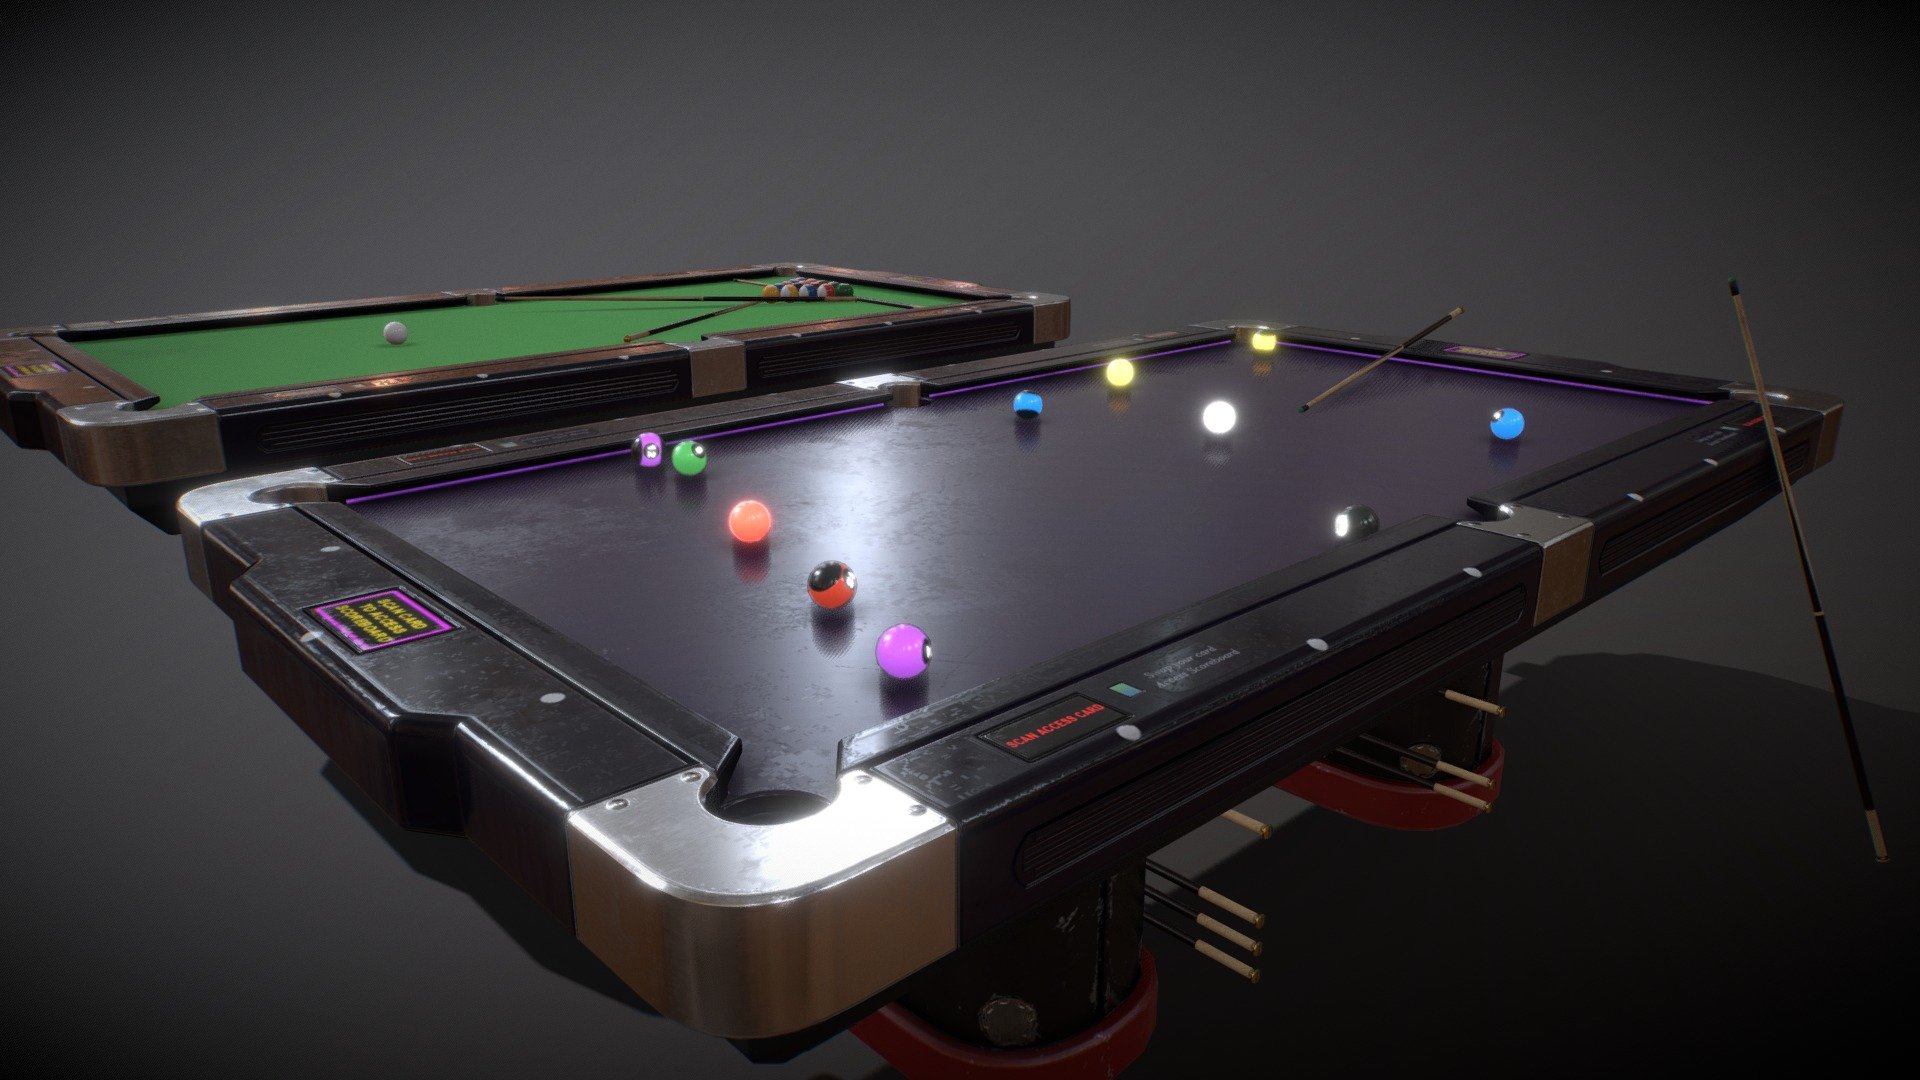 Pool table with Neon Balls - PBR- Low Poly

This model content a normal Pool table and a Neon Pool table Texture with Pool table, Cue Stick 16 normal ball and 16 neon ball mesh


The size of the pool table is Length 301cm width 165cm and height 83cm
Triangle count of this asset from 10708 to  392
Texture is  4096 to 1024 for each assets
Including RMA (Roughness, Metaliness, AO) map for optimization

Texture type-
* Albedo
* Normal
* Roughness
* Metalness
* AO
* Emissive
* Diffuse only/ Unlit

File Format: FBX, OBJ, TGA

This assets can be used for any project including game, movie, novel graphic, advertisement, personel project and etc. You may not resell or distribute any content of the asset - Pool table with Neon Balls - Buy Royalty Free 3D model by RavenLoh 3d model